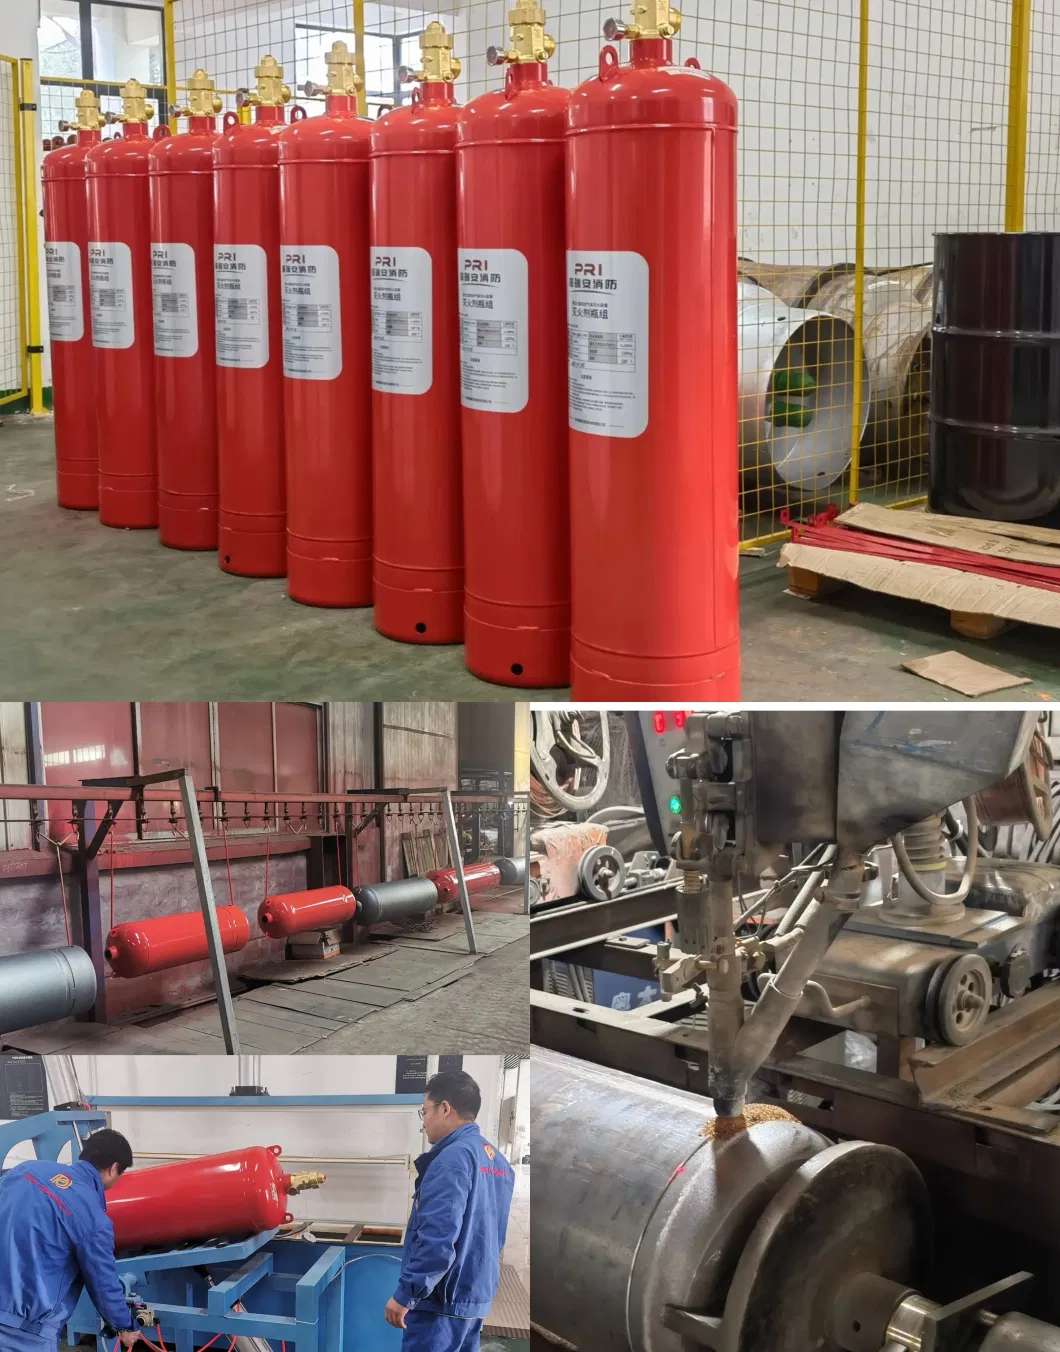 25L Dry Powder Clean Agent Fire Suppression System for Yachtengine Rooms